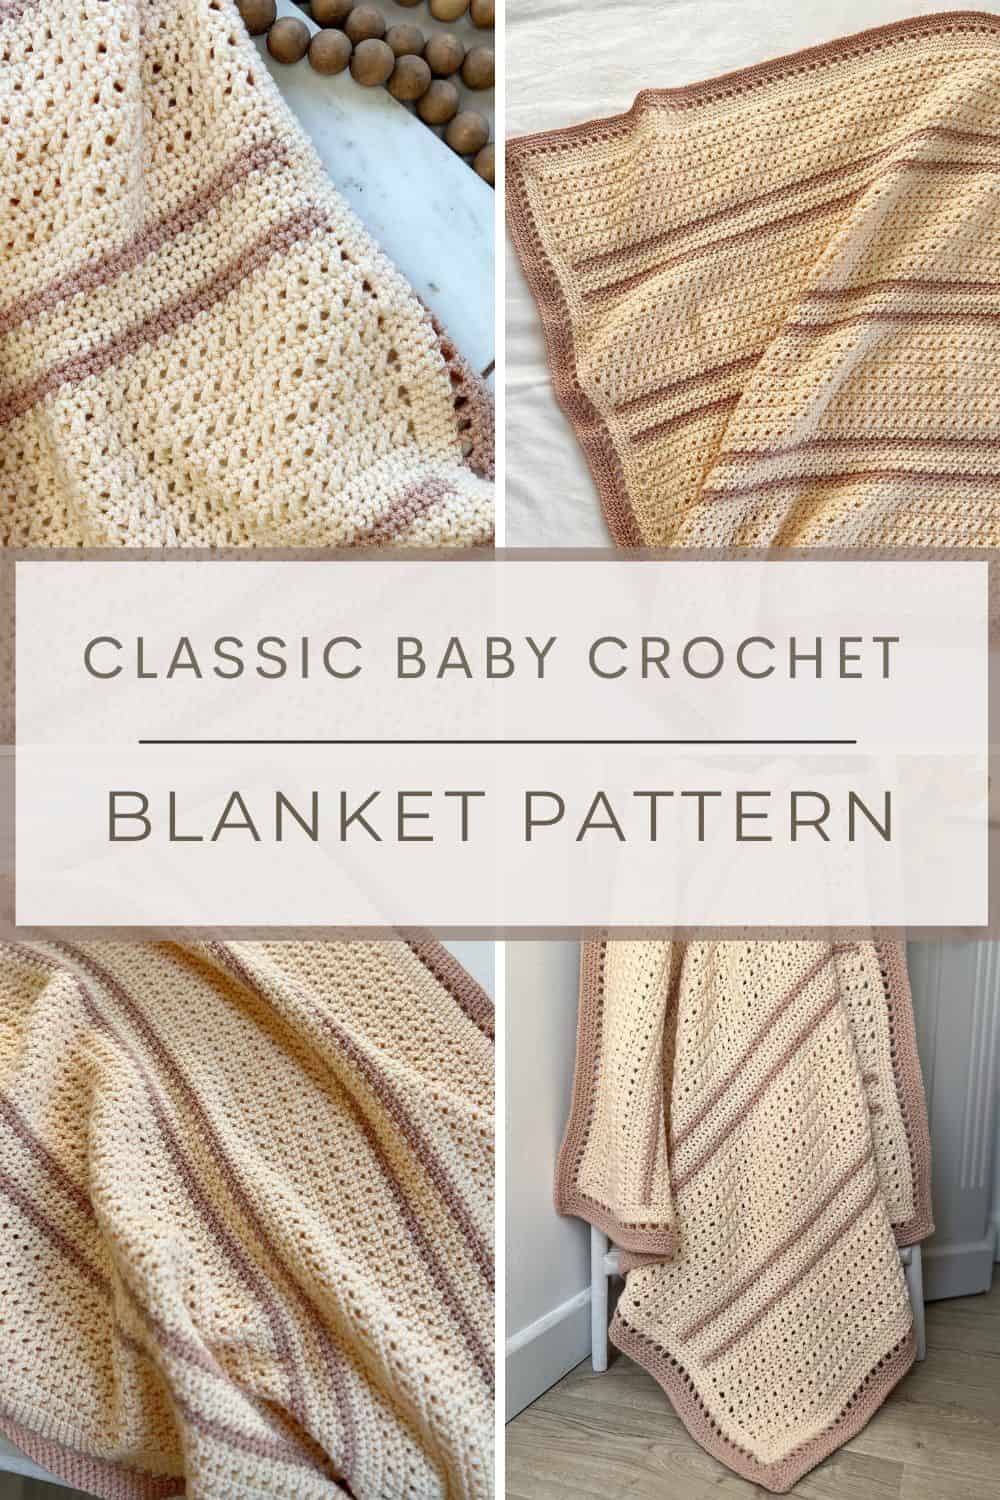 4 images of a classic baby blanket crochet pattern.